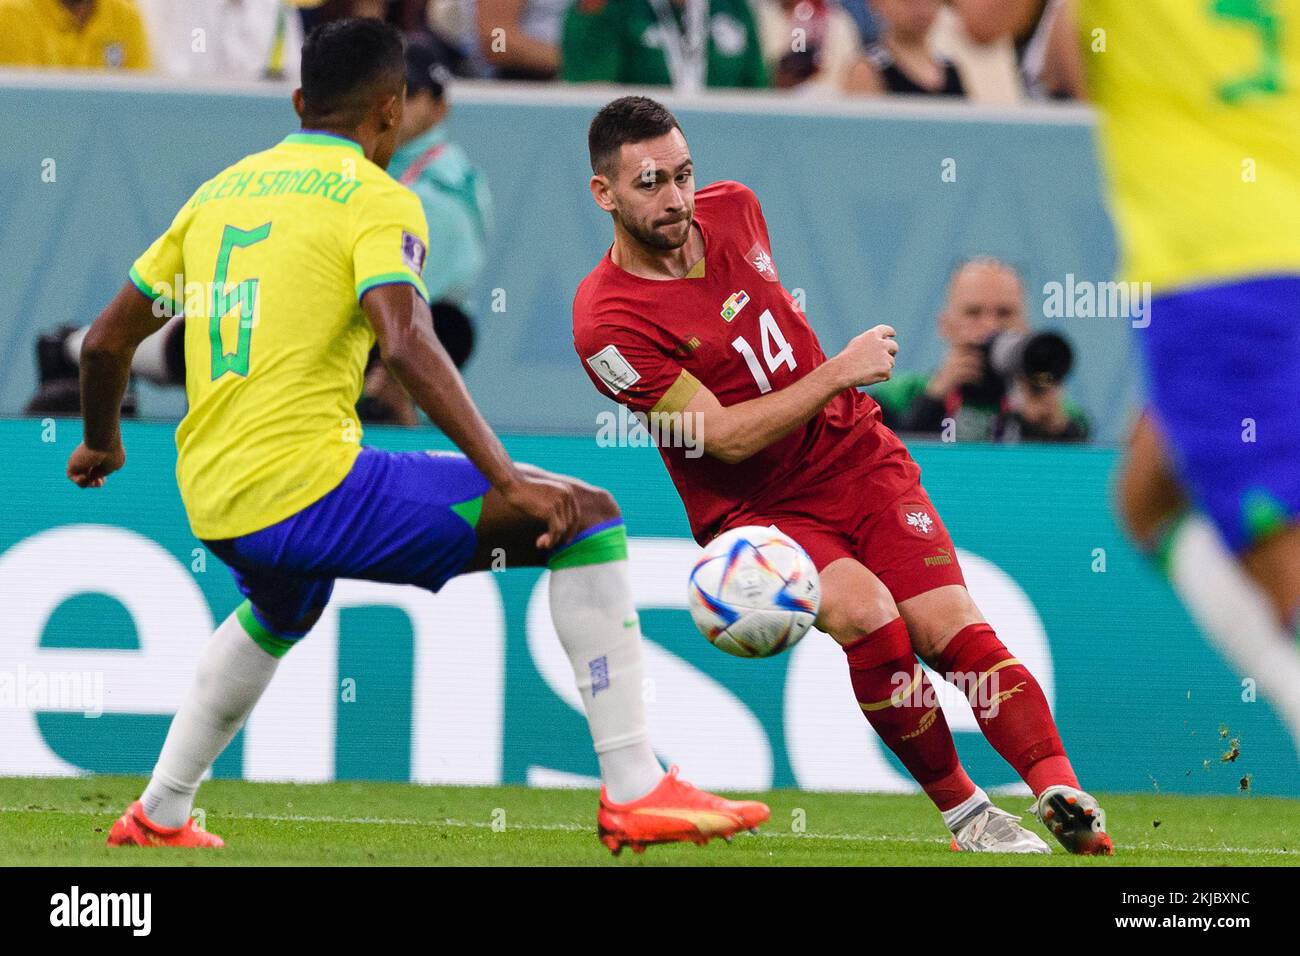 Lusail, Qatar. 24th Nov, 2022. Lusail, Qatar, Nov 25th 2022: XXXXXXXXXXXXXXX during the match between Brazil vs Serbia, valid for the group stage of the World Cup, held at the Lusail National Stadium in Lusail, Qatar. (Marcio Machado/SPP) Credit: SPP Sport Press Photo. /Alamy Live News Stock Photo